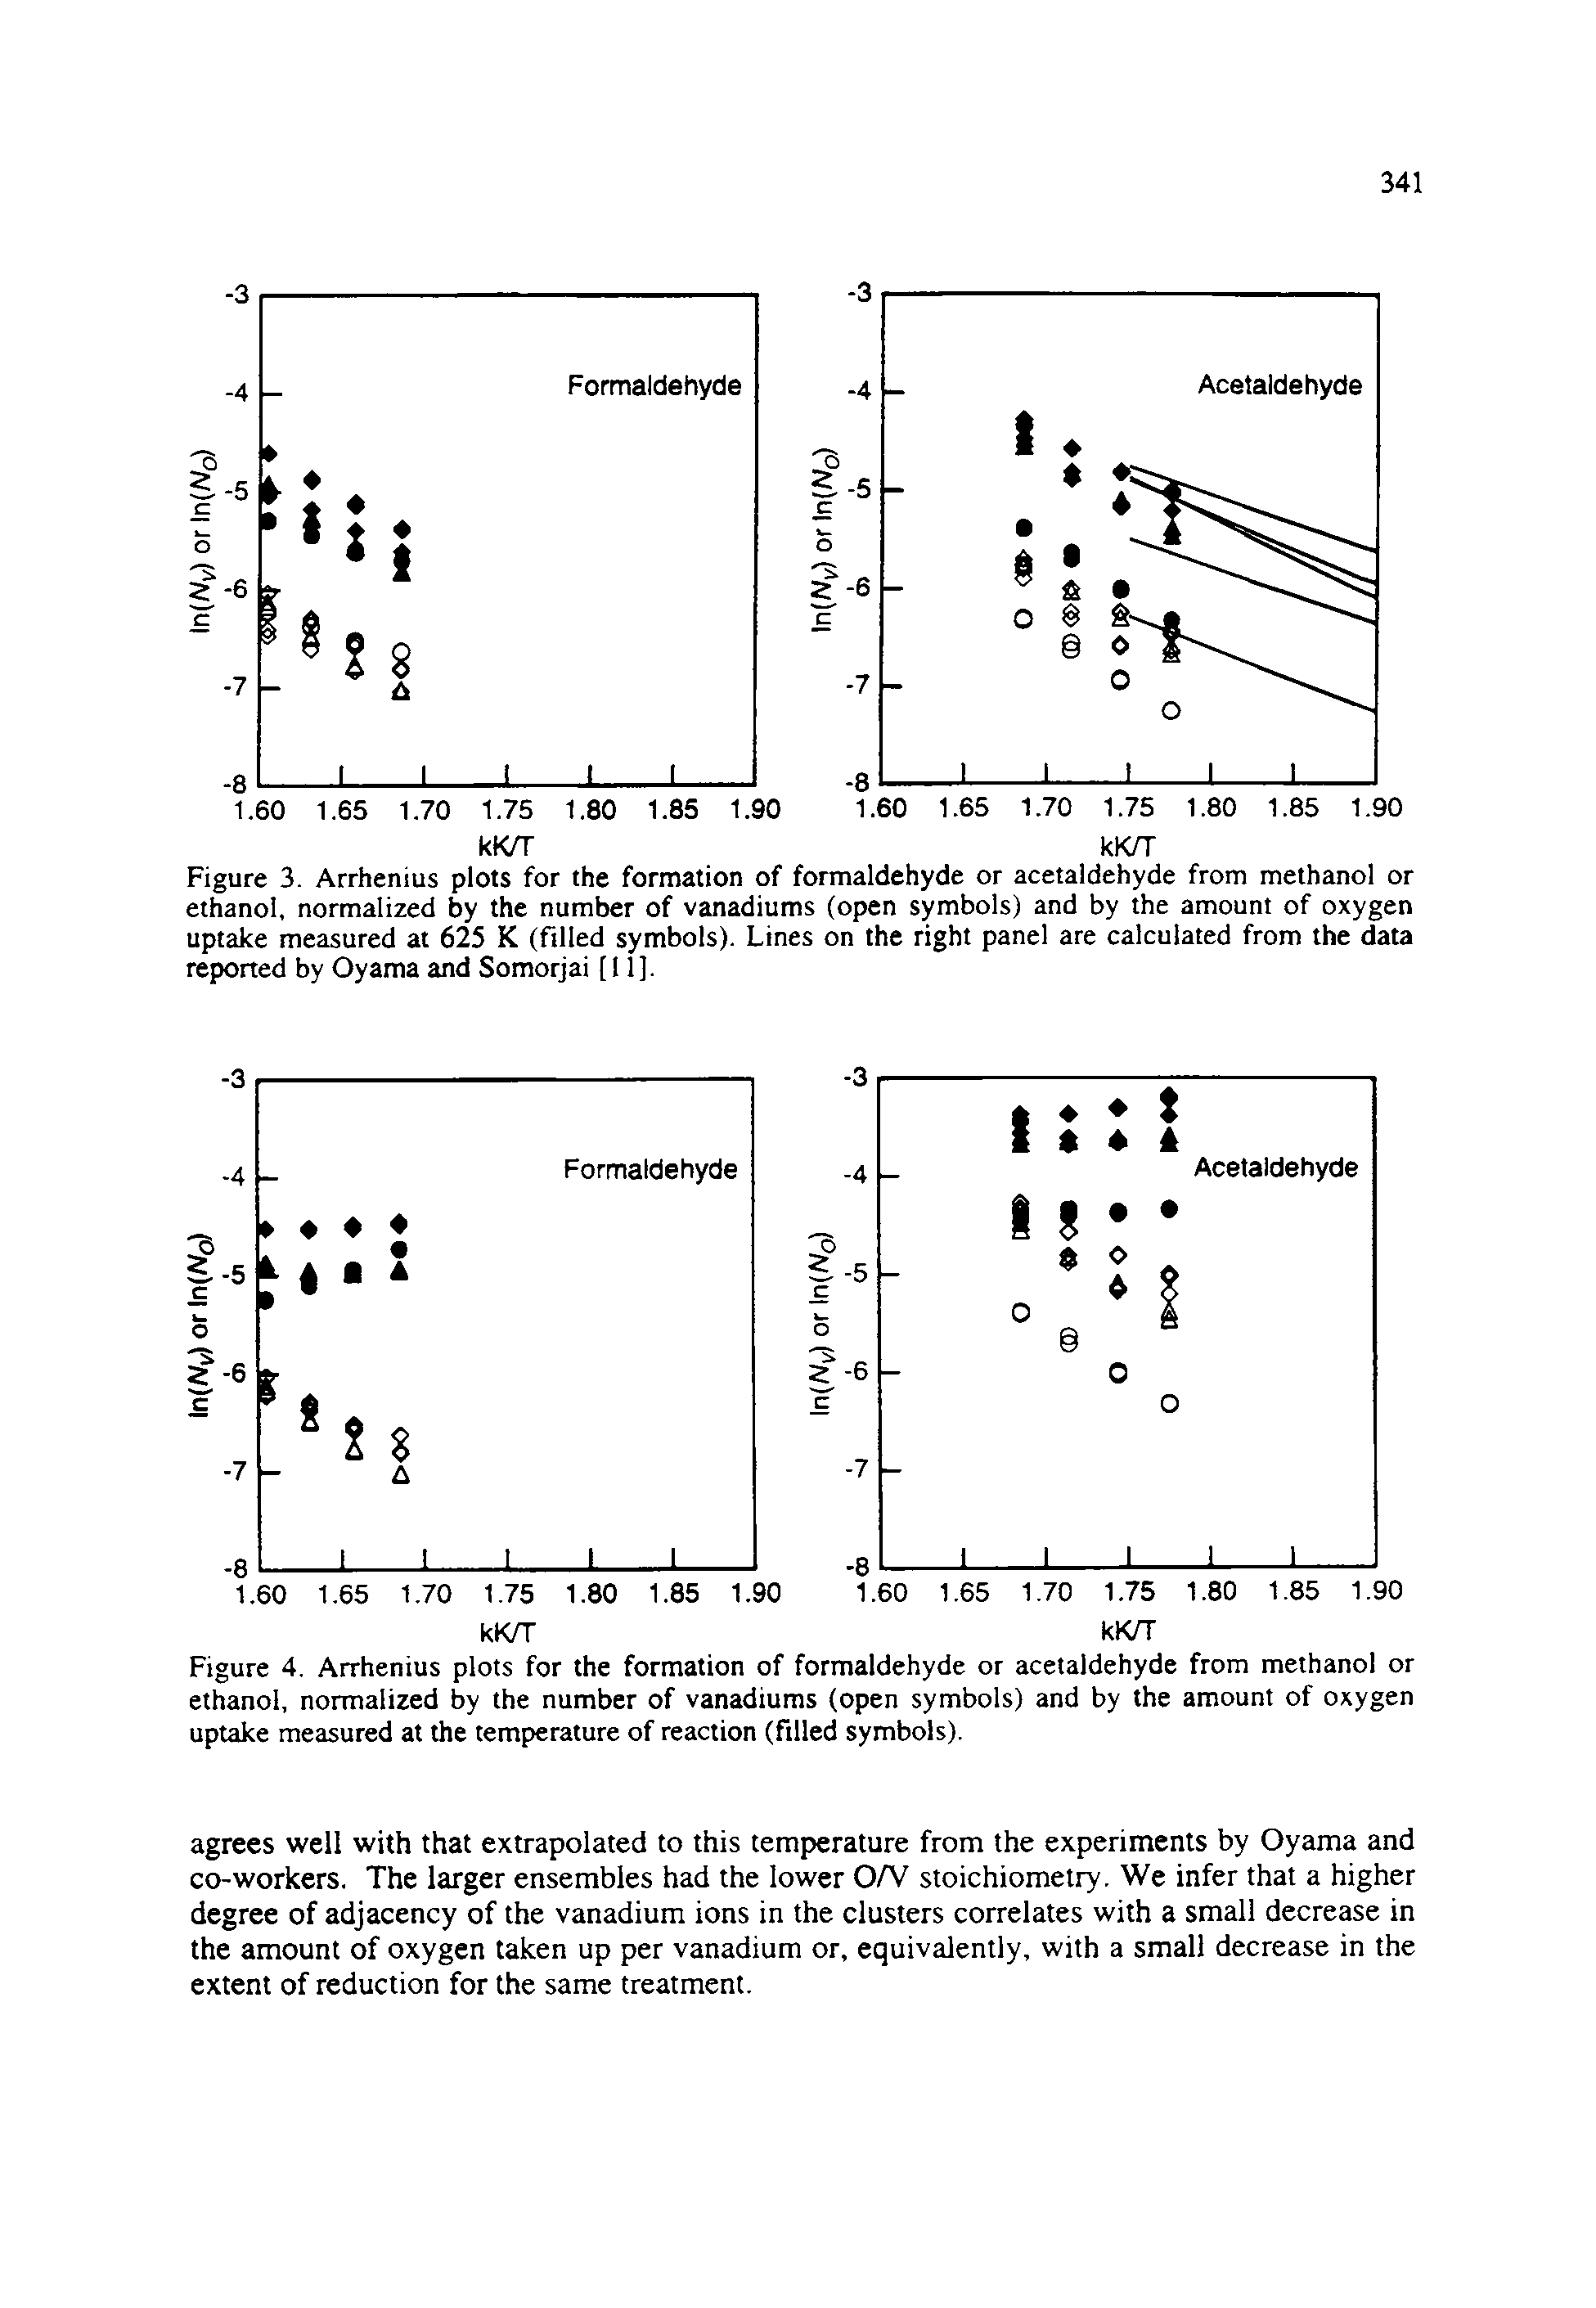 Figure 4. Arrhenius plots for the formation of formaldehyde or acetaldehyde from methanol or ethanol, normalized by the number of vanadiums (open symbols) and by the amount of oxygen uptake measured at the temperature of reaction (filled symbols).